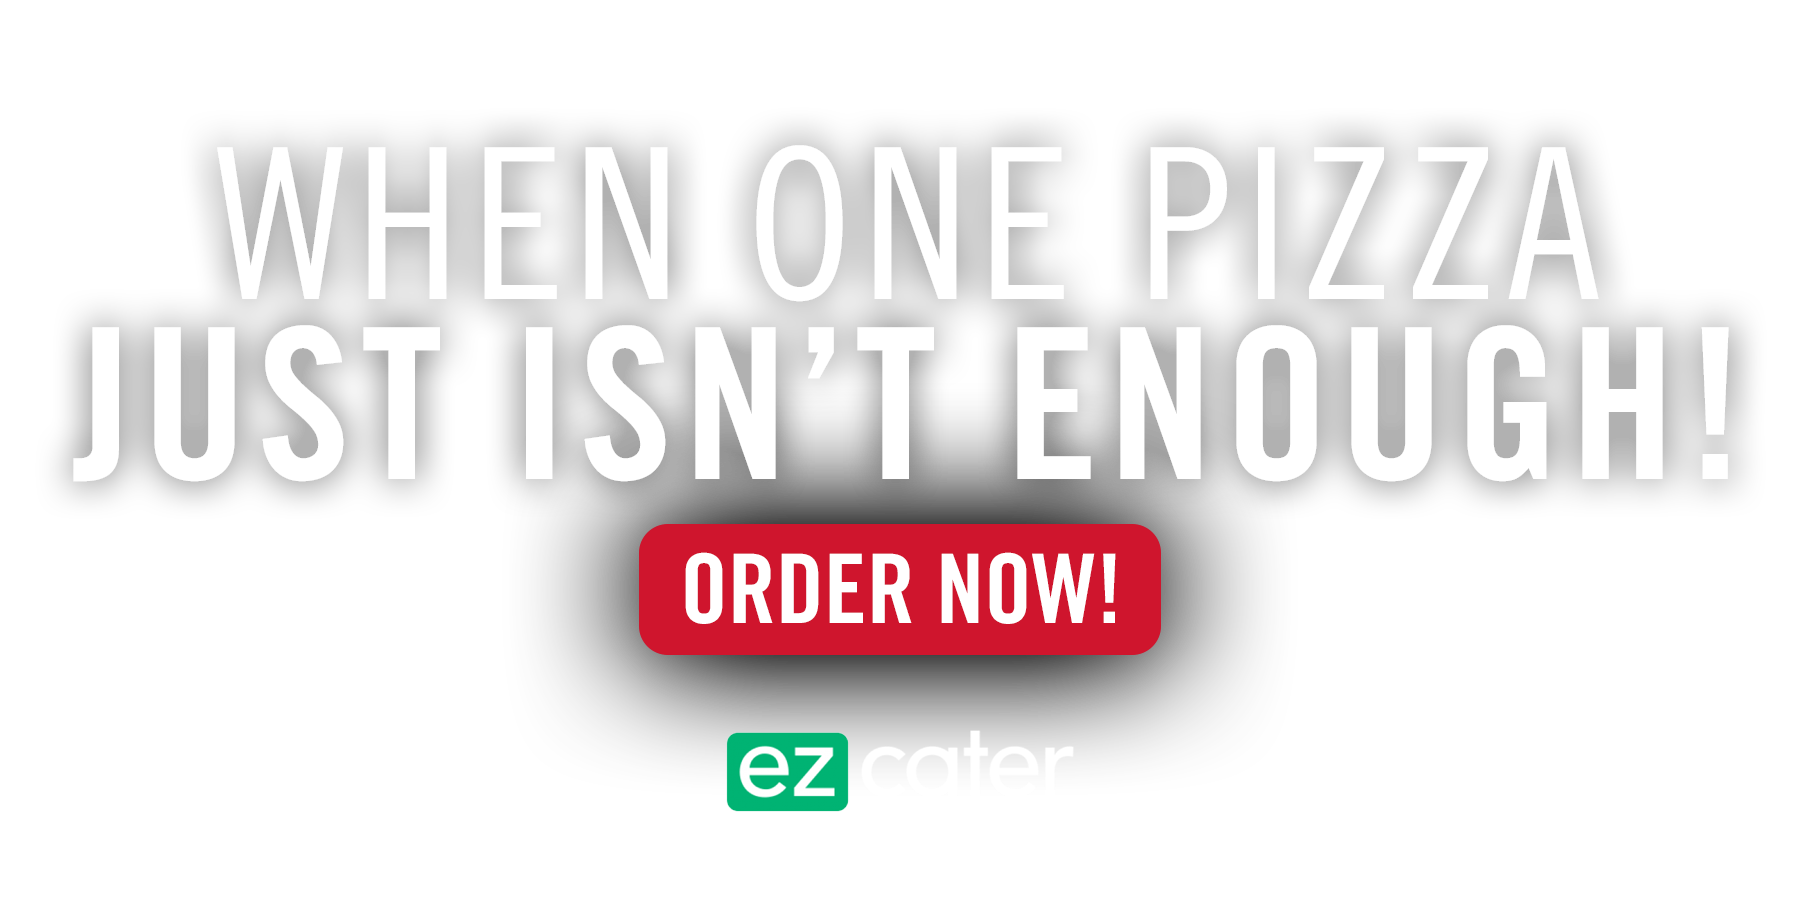 When One Pizza Just Isn't Enough! Order Now with EZ Cater